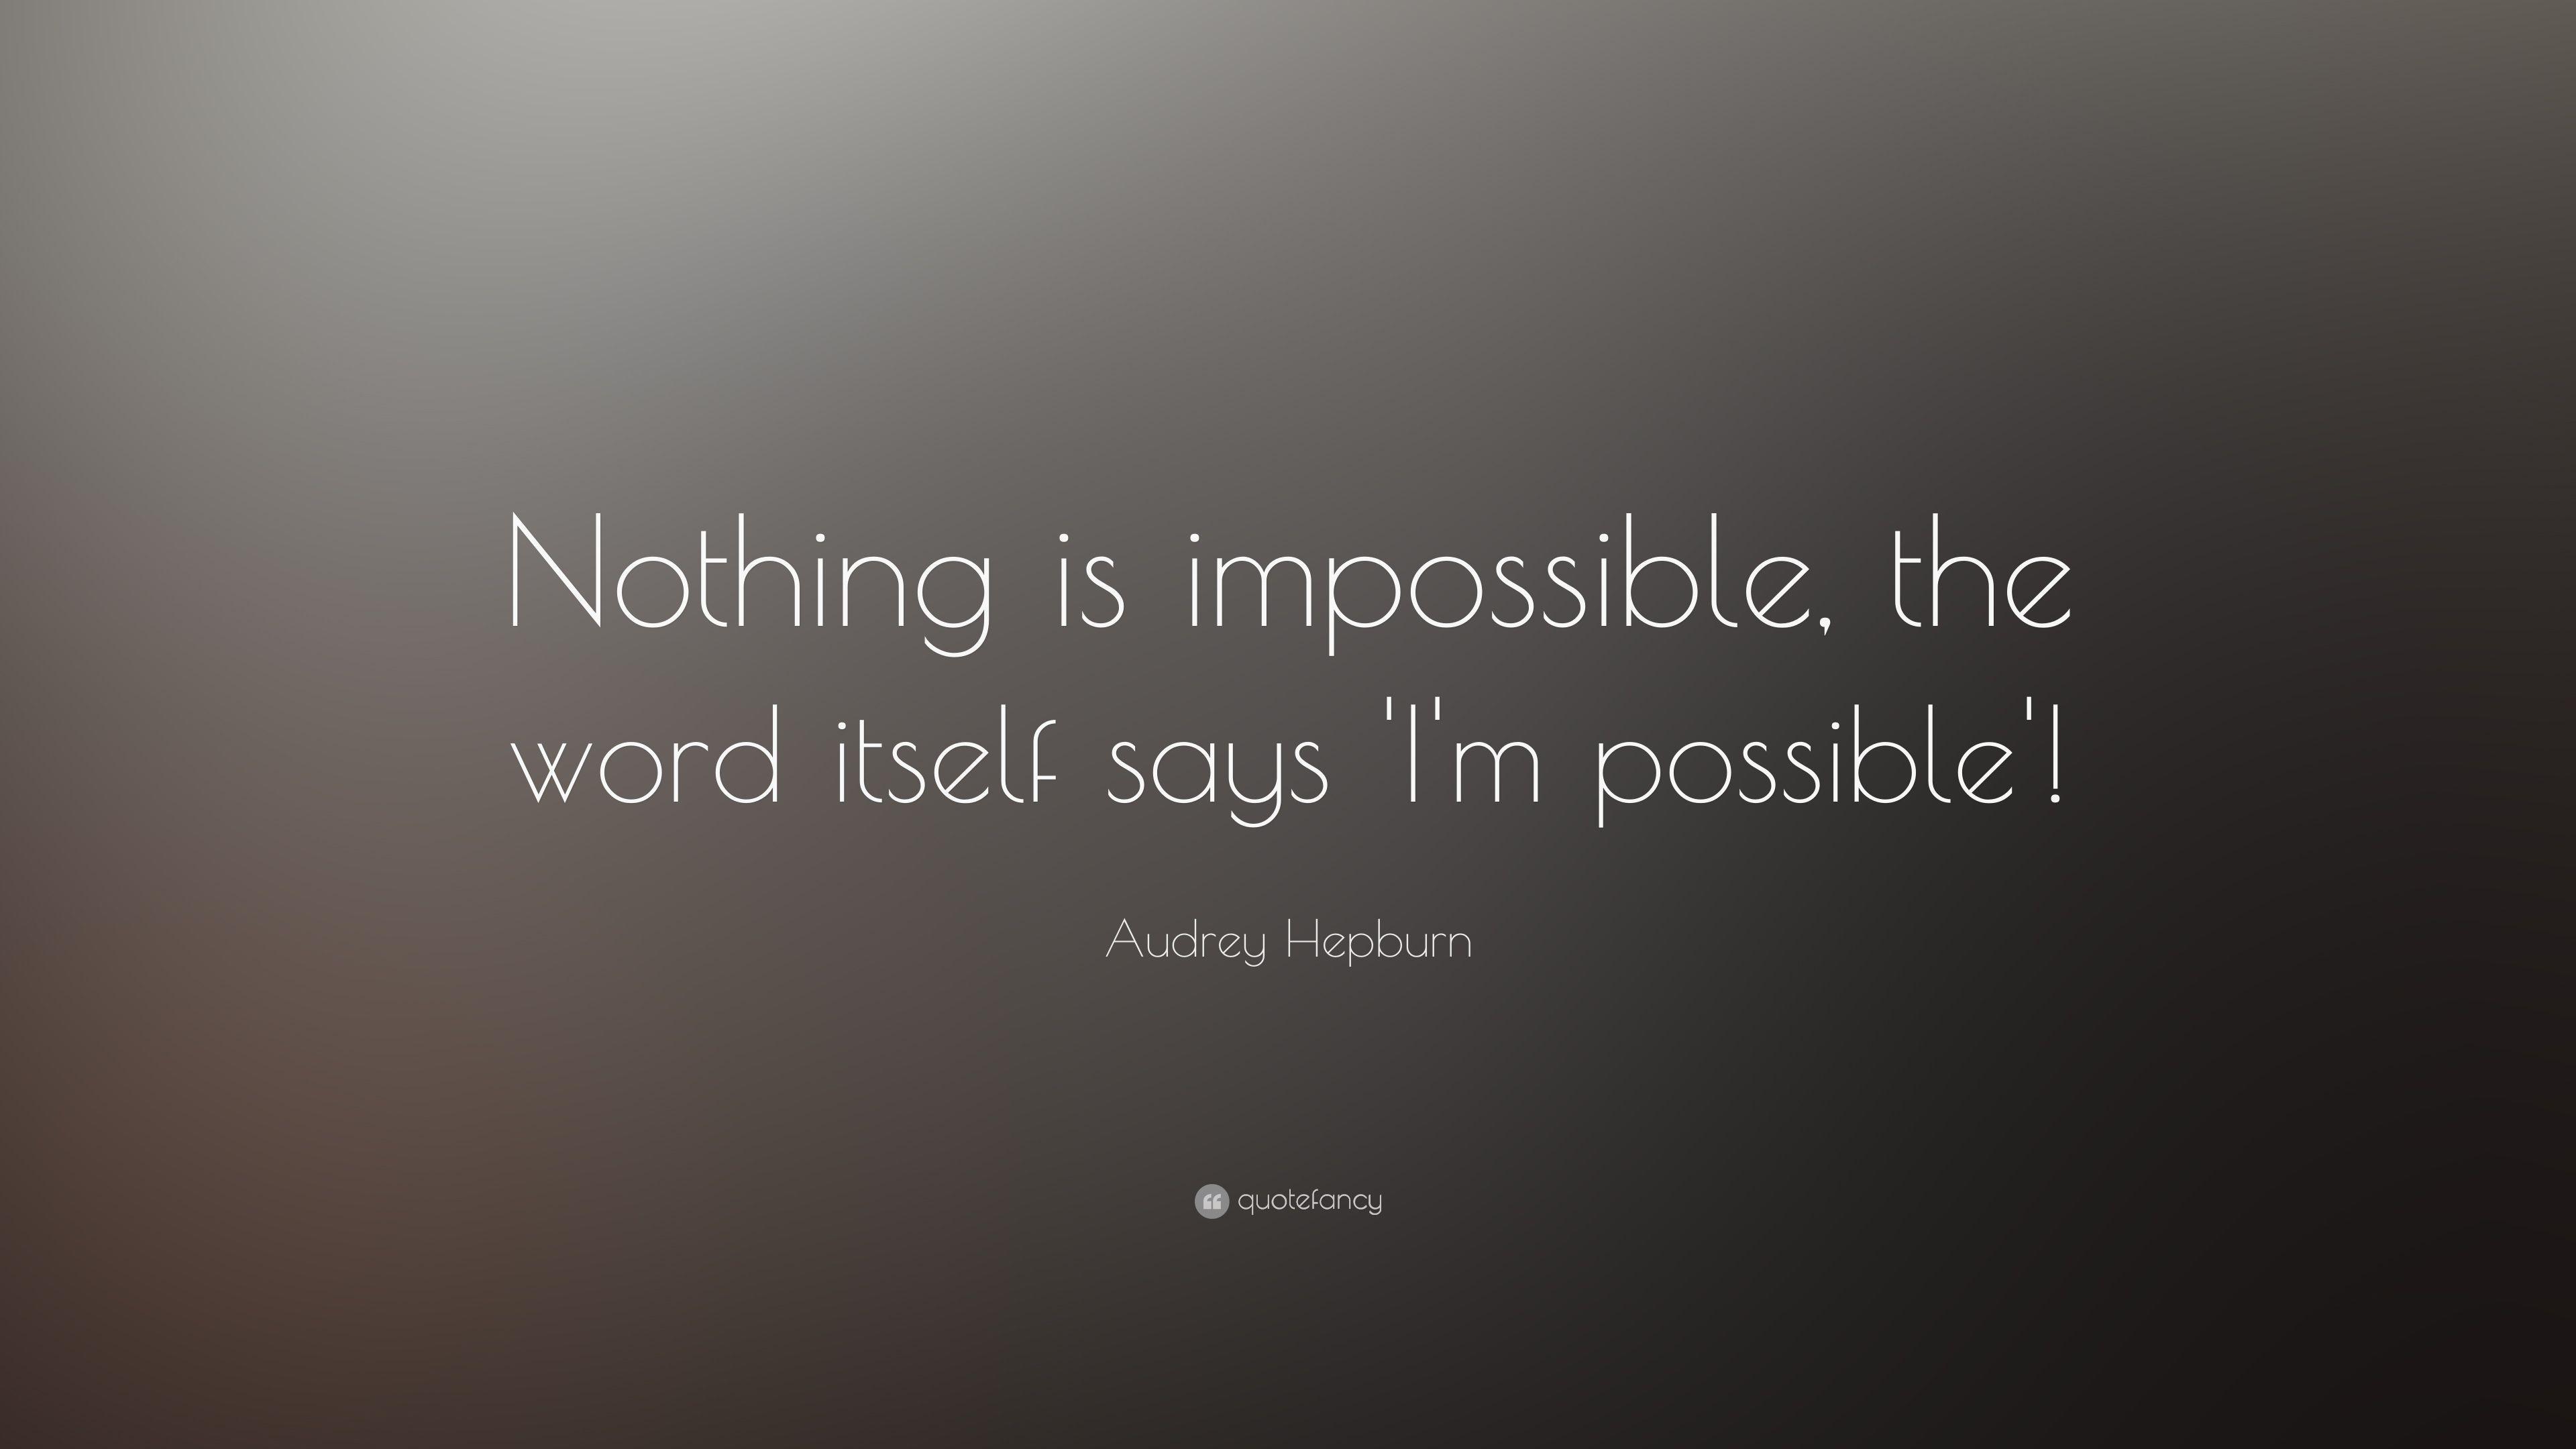 Audrey Hepburn Quote: “Nothing is impossible, the word itself says